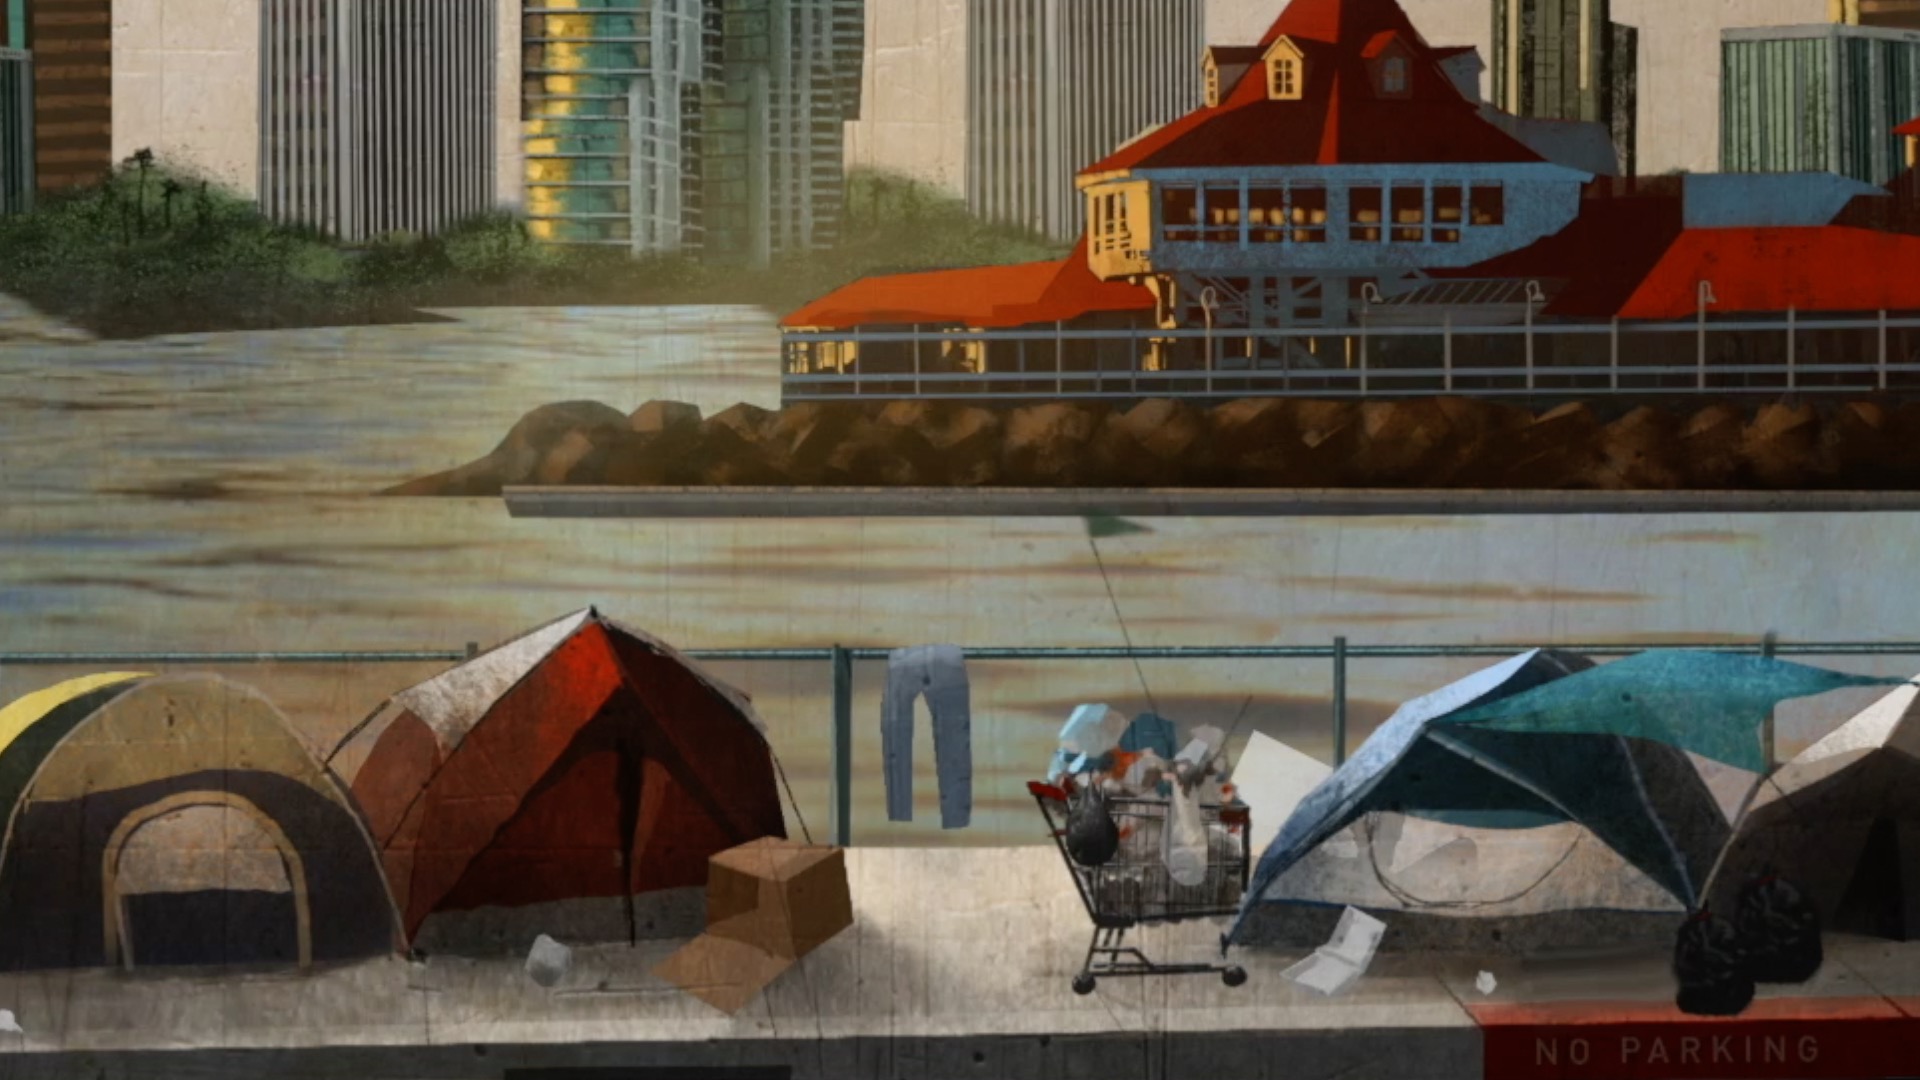 illustration of homeless encampment by Long Beach waterfront.